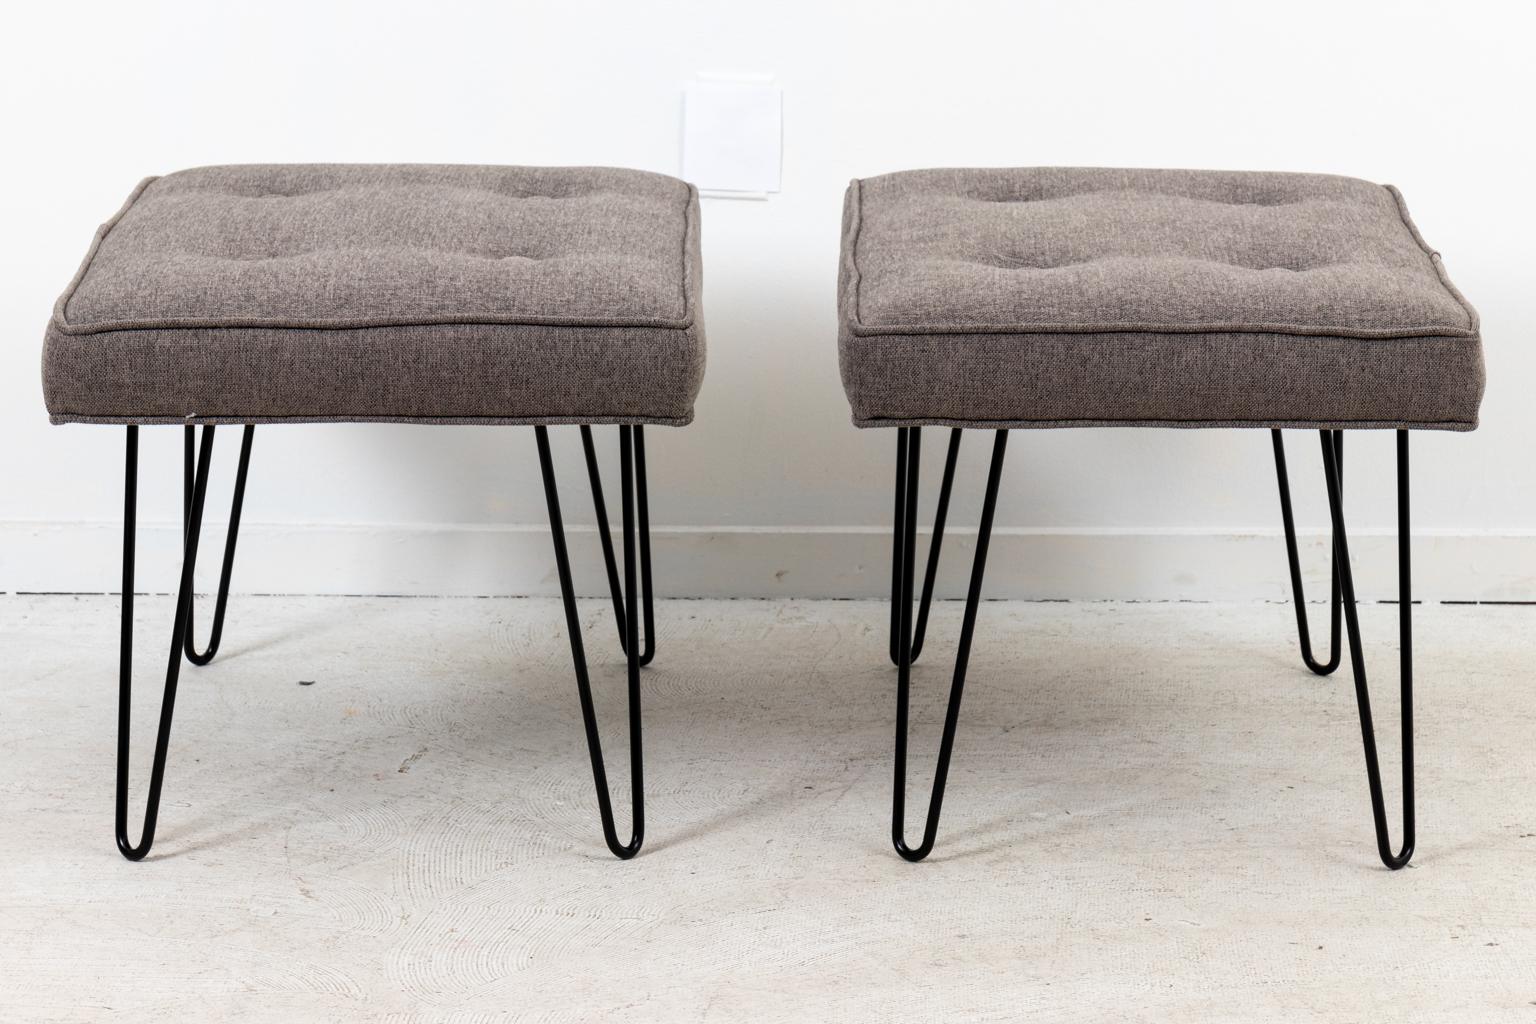 Pair of Mid-Century Modern style hairpin leg upholstered benches with satin black hairpin legs and new wool upholstered seats with tufted buttons, circa 21st century. Made in the United States. Please note of wear consistent with age.